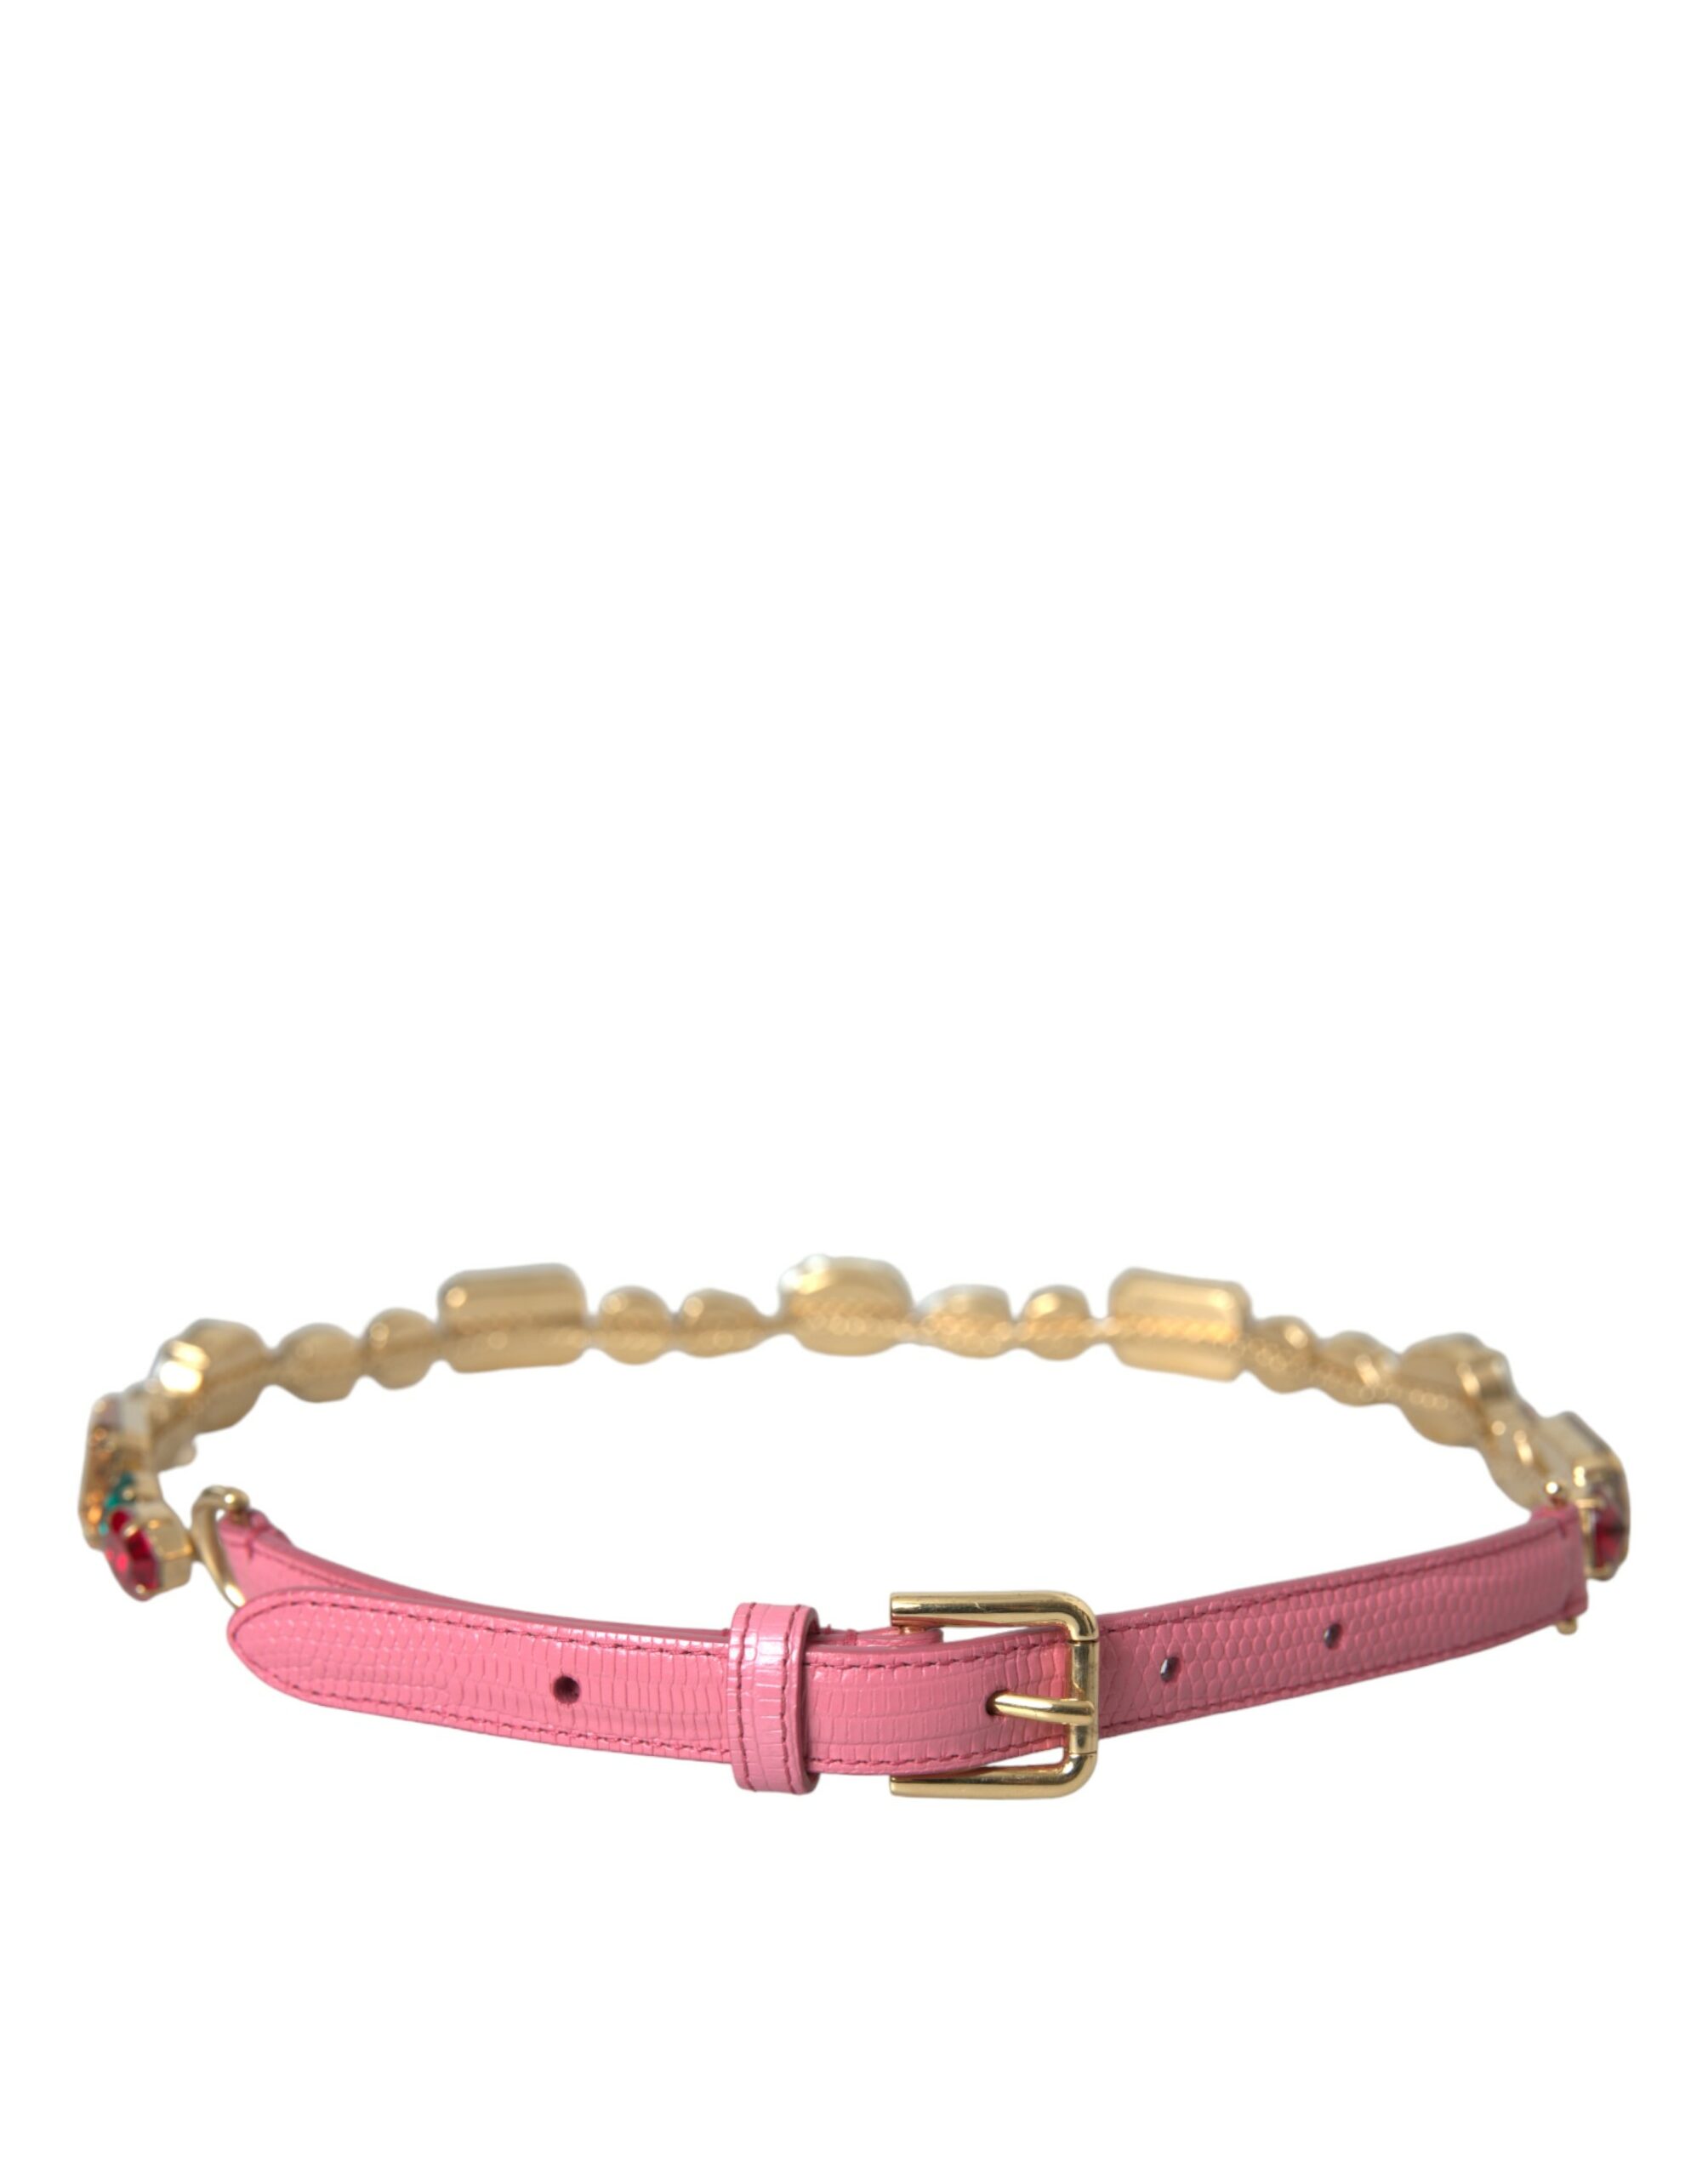 Pink Dolce & Gabbana Pink Leather Crystal Chain Embellished Belt 85 cm / 34 Inches